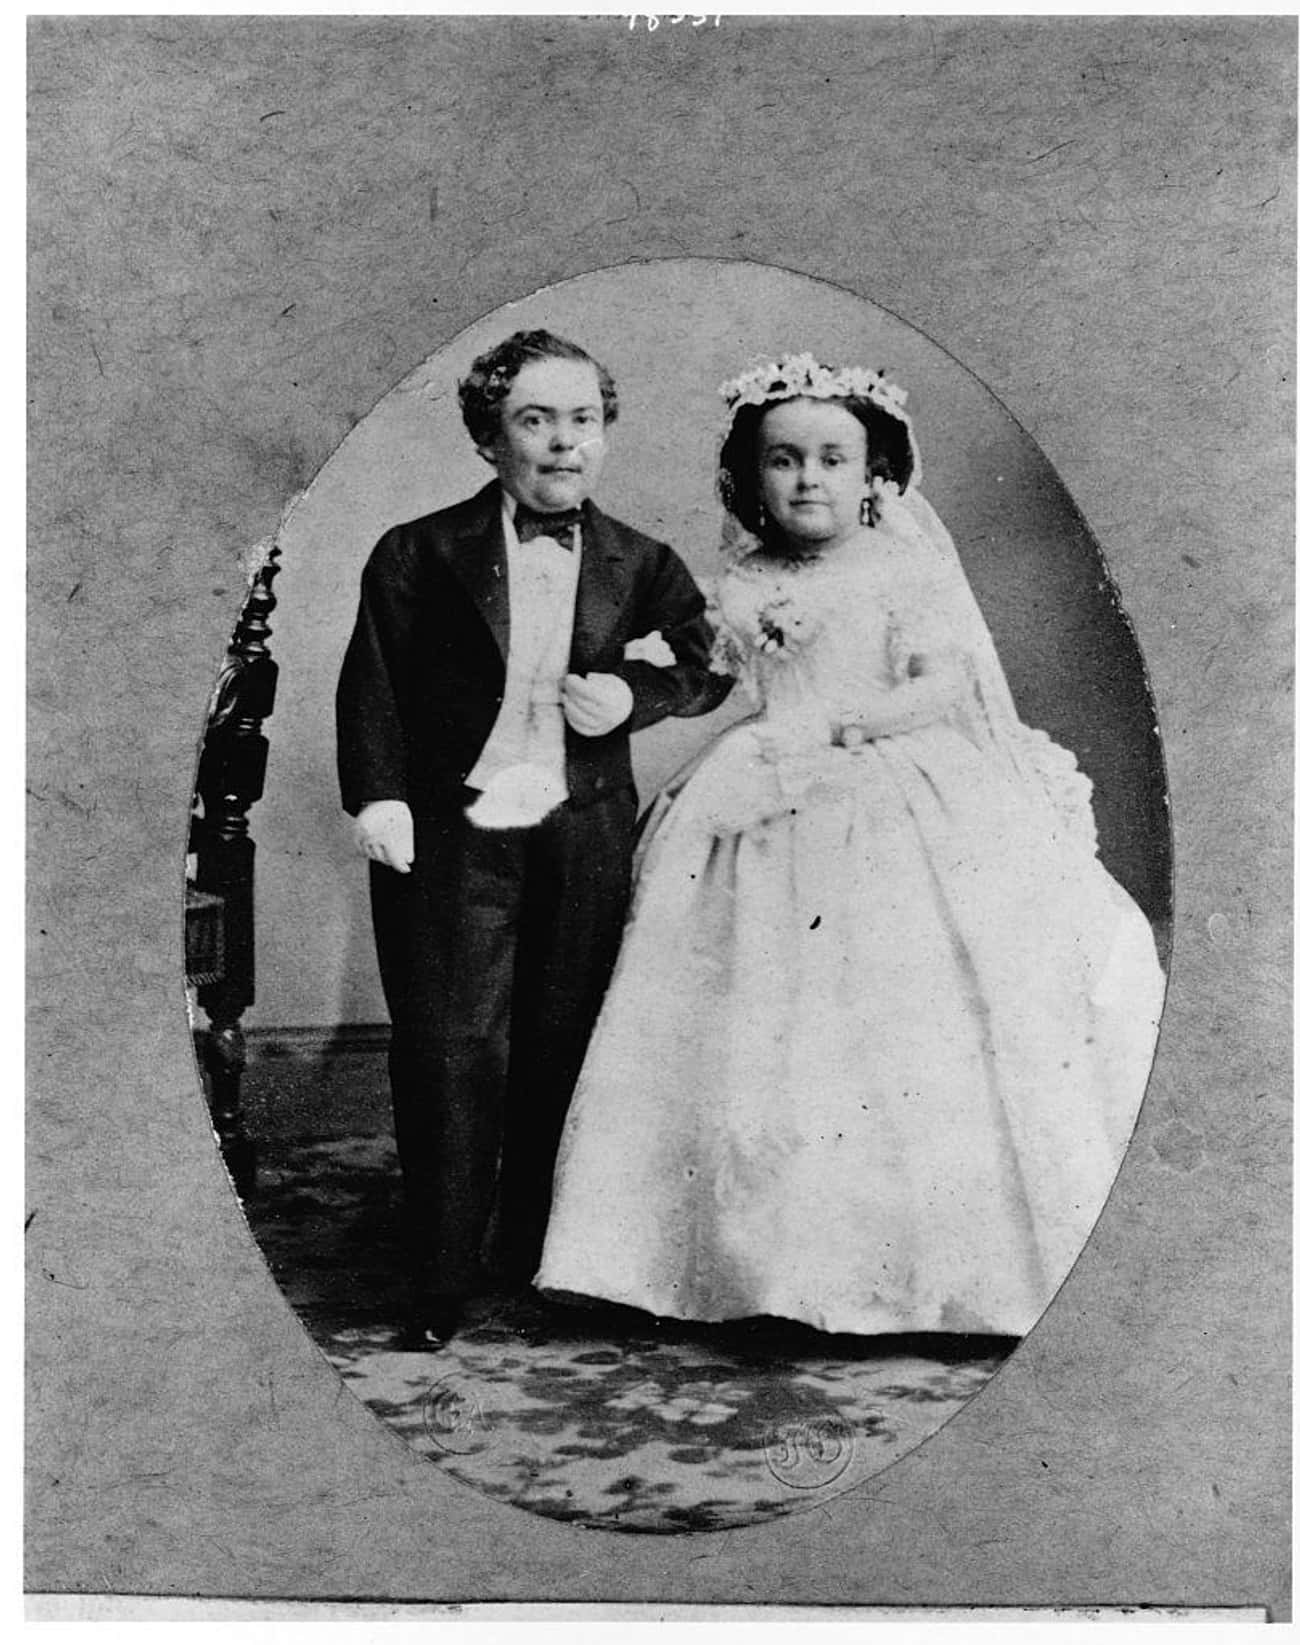 Pictures Of Adorable Couples In The 1800s